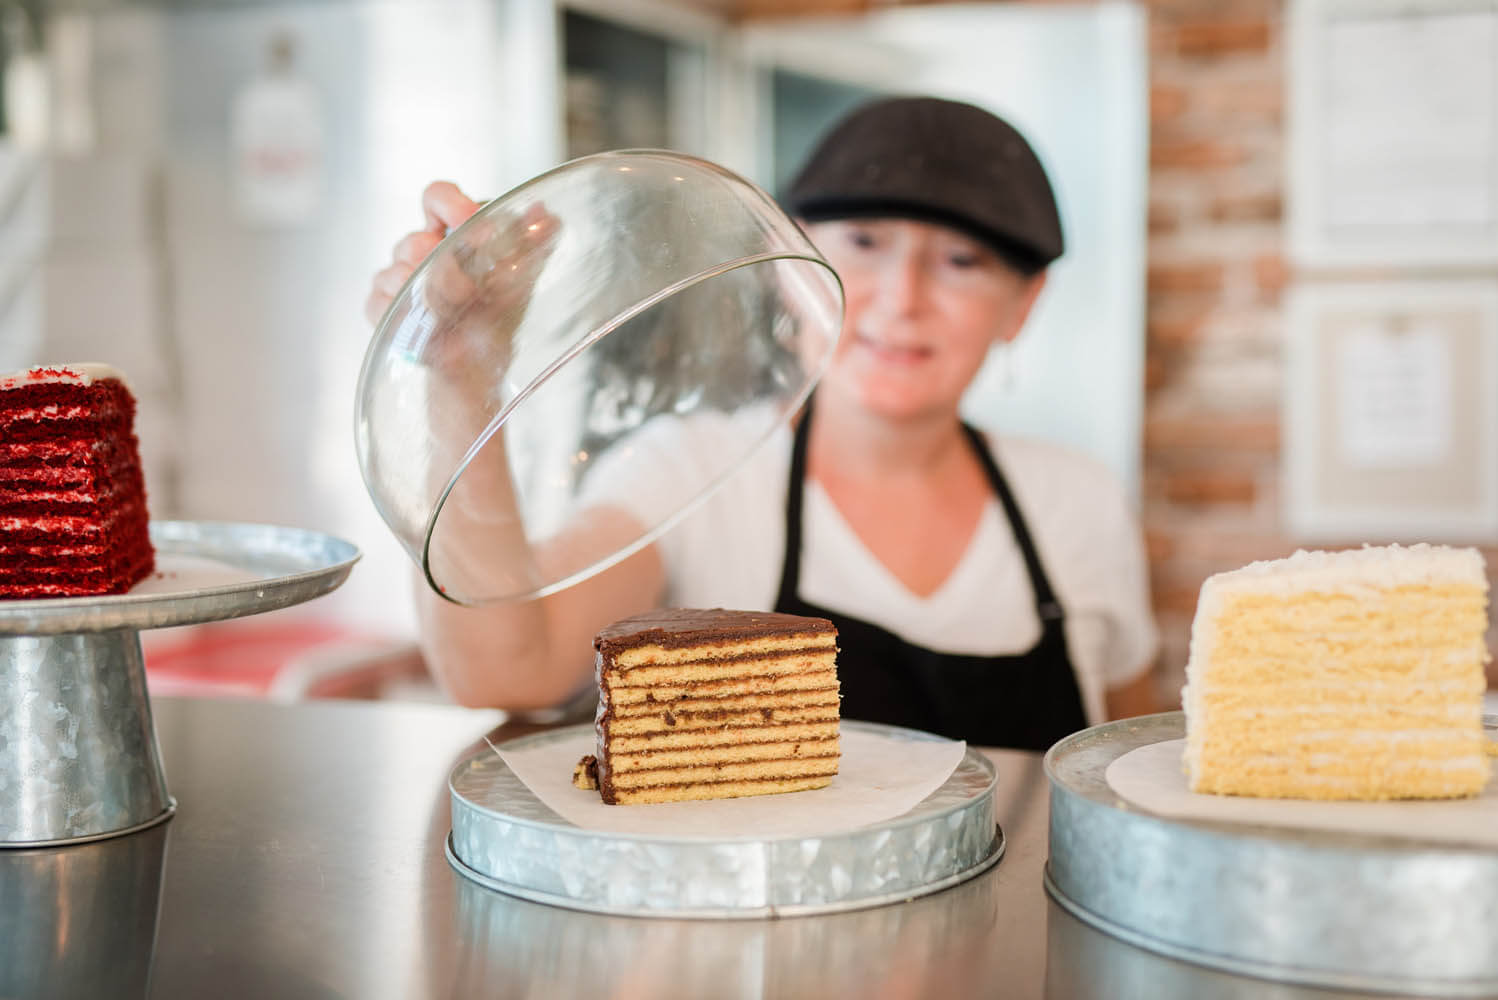 Female pastry chef in front of three pieces of cake placed on cake holder